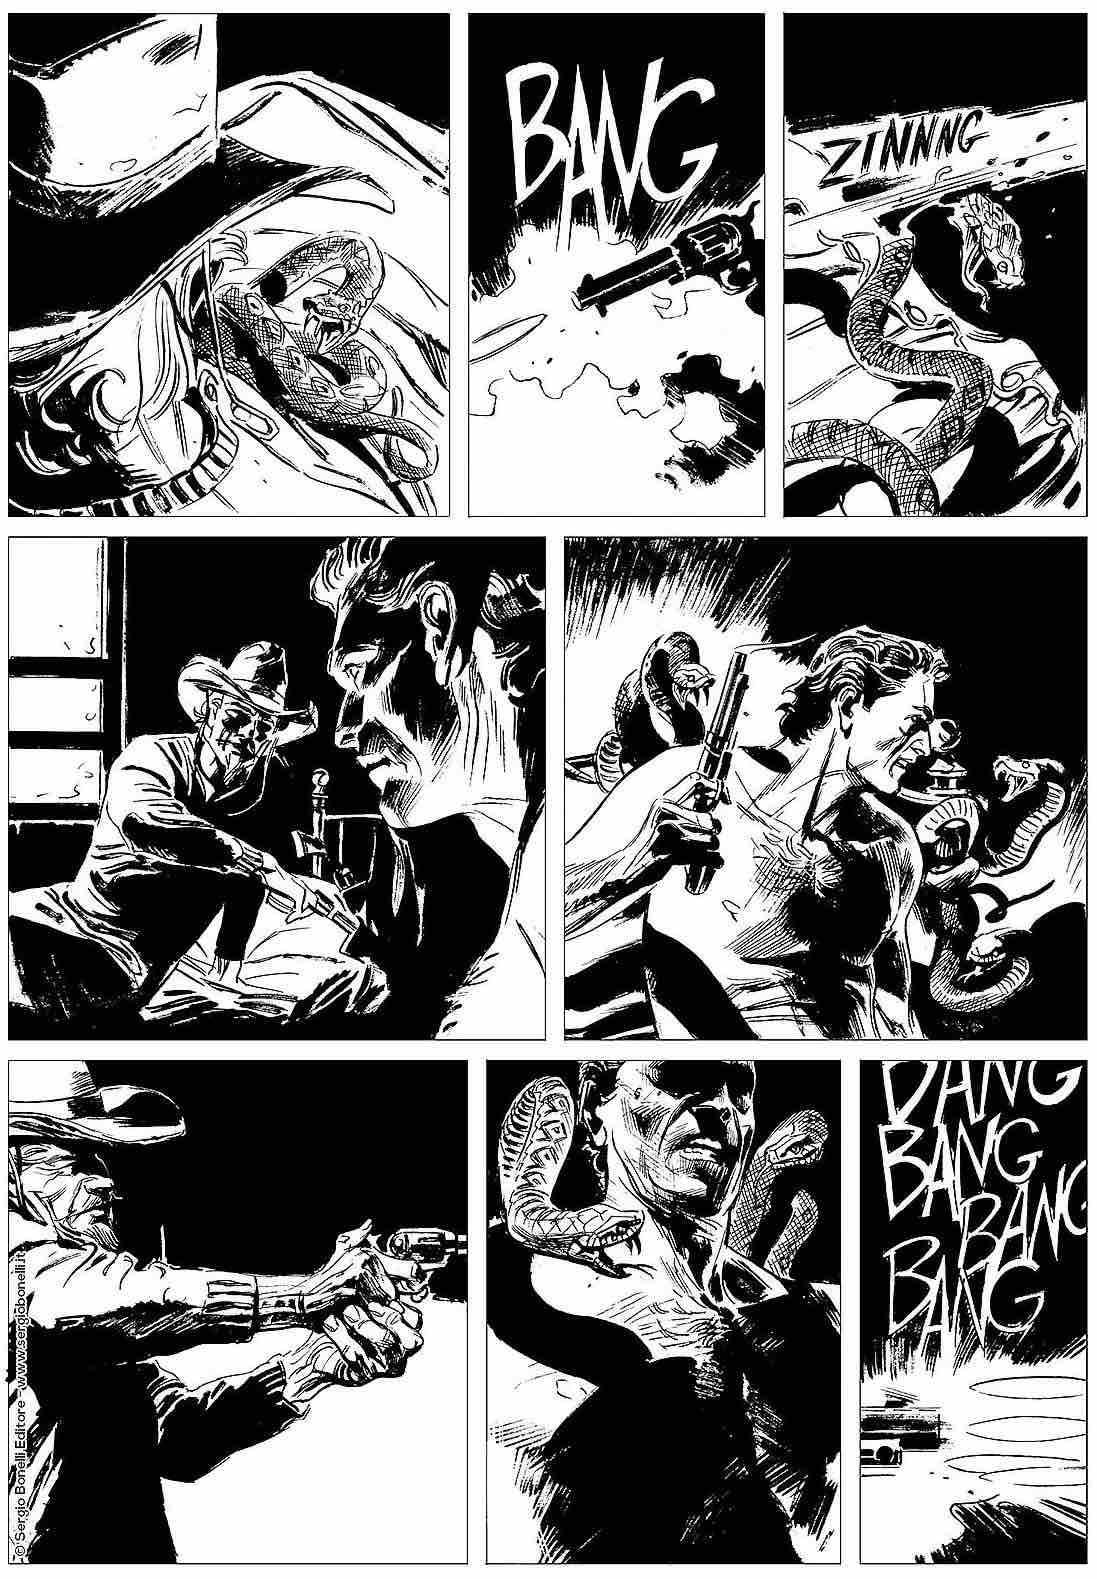 Tex Albo Speciale #36 - art by art by Massimo Carnevale